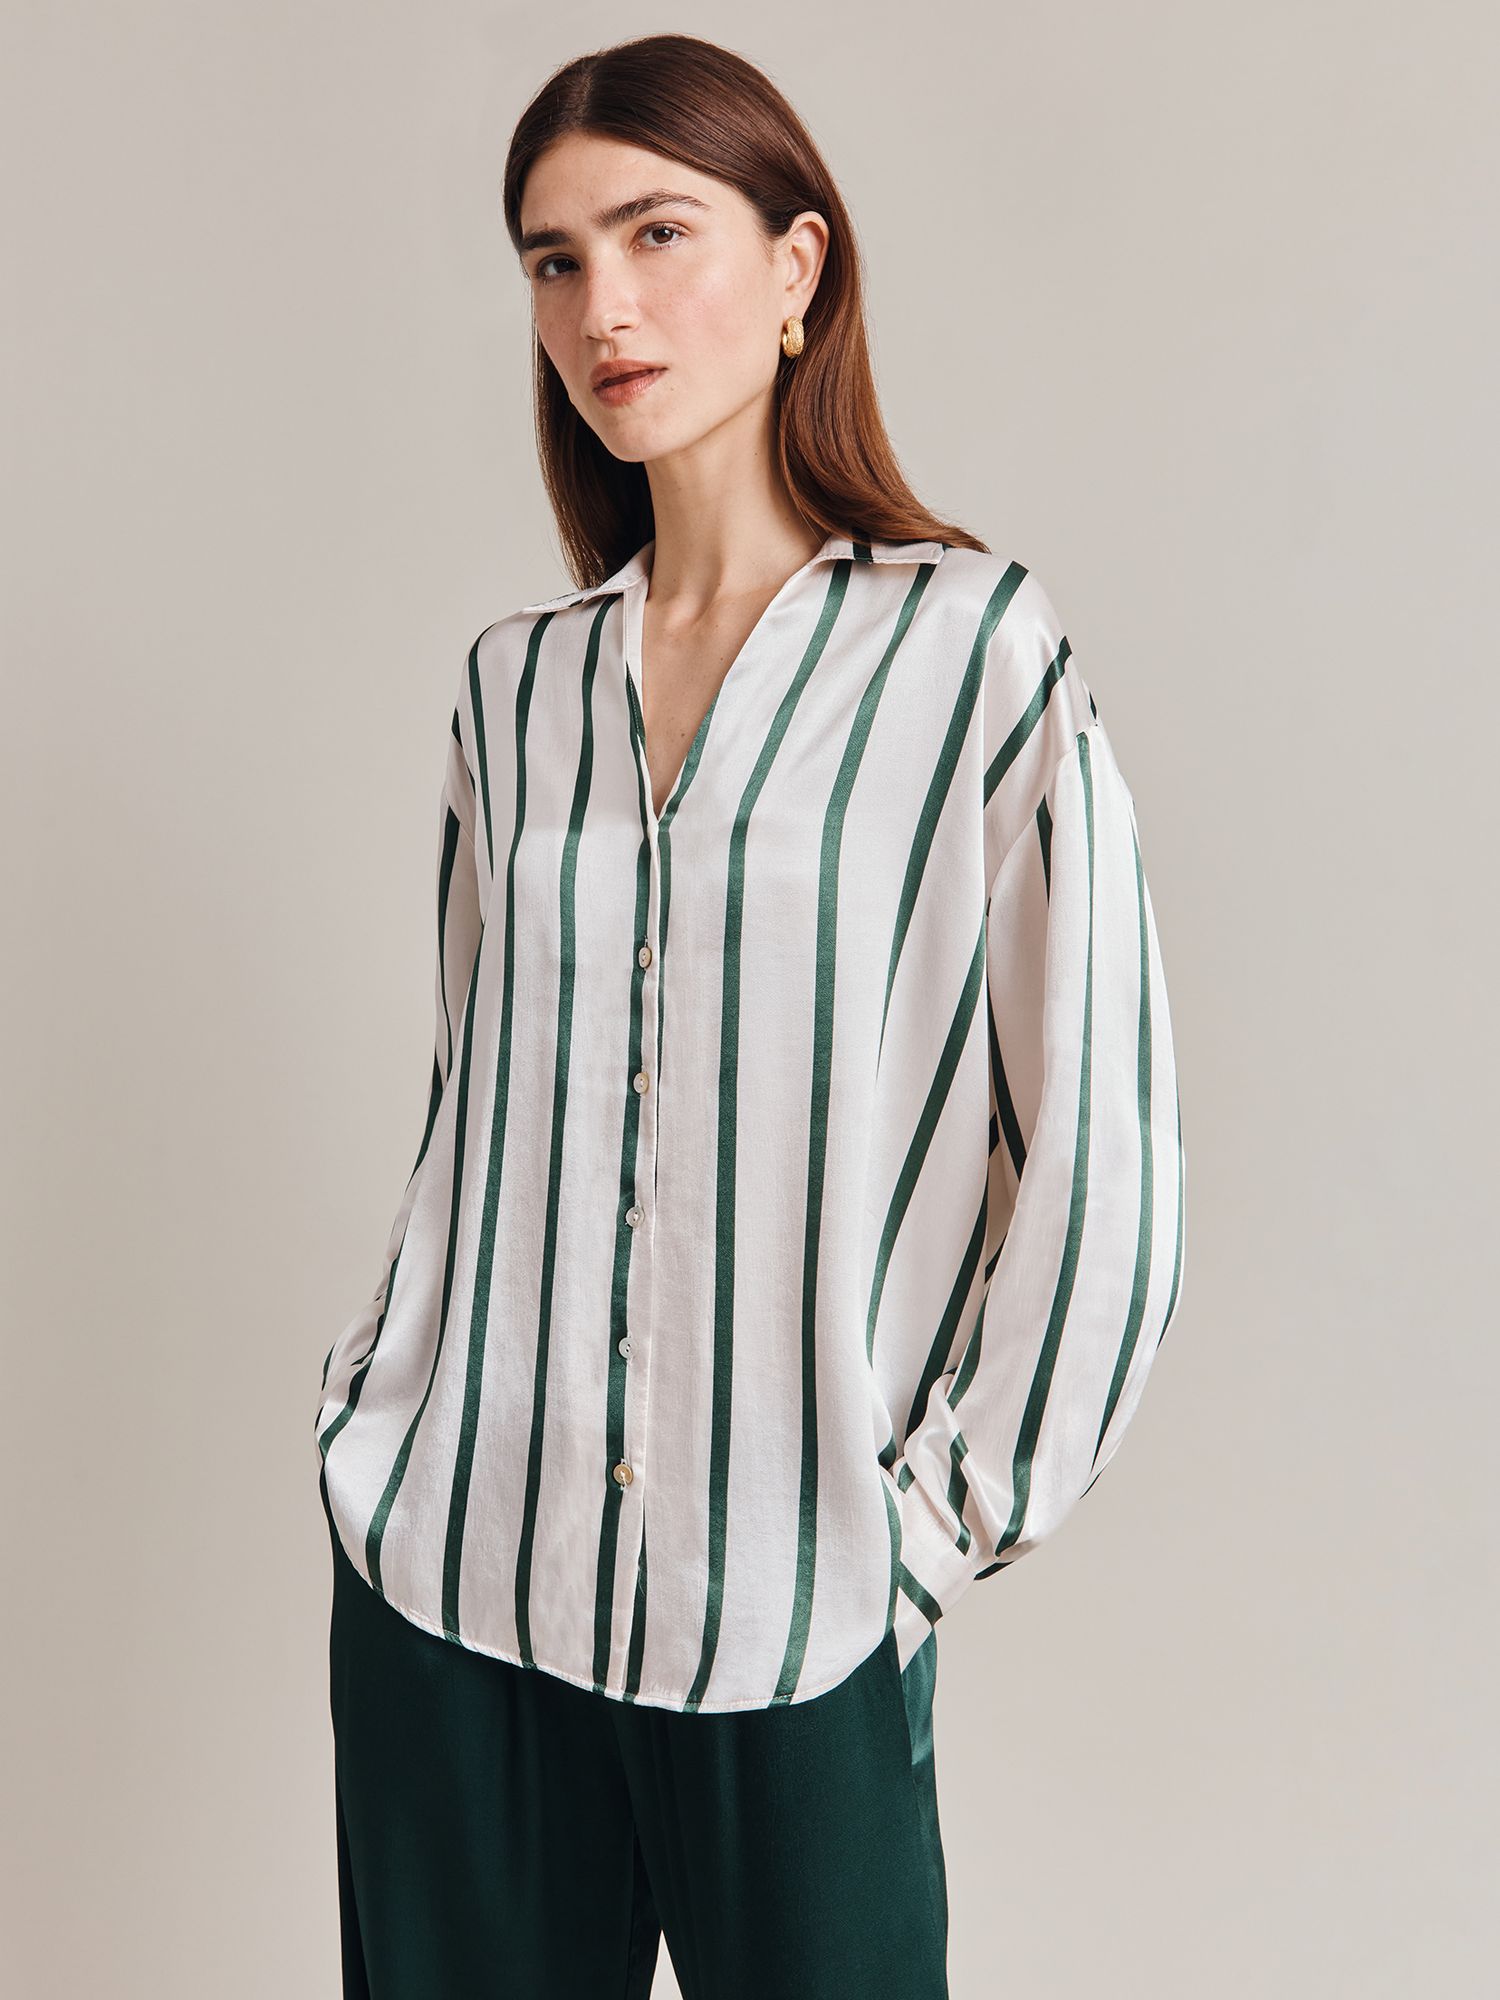 Ghost Amy Stripe Shirt, Green at John Lewis & Partners